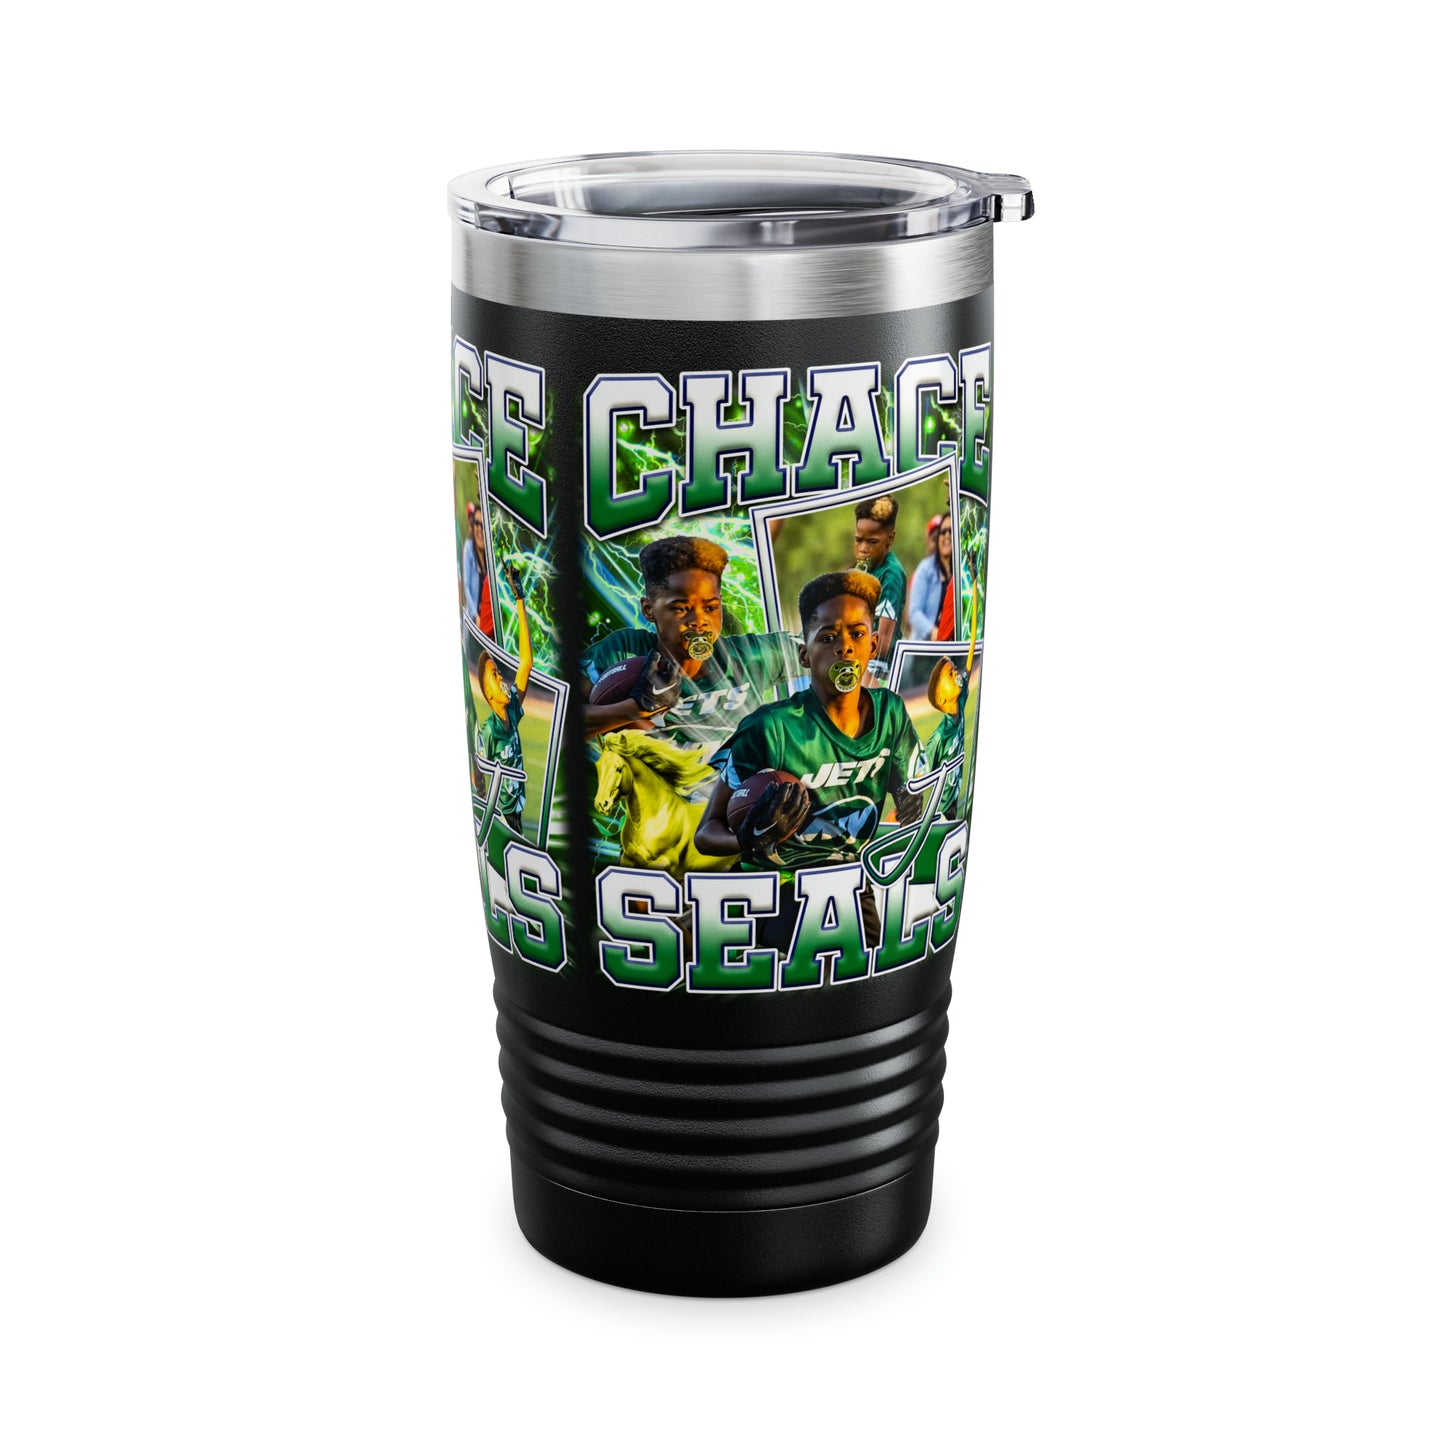 Chace J Seals Stainless Steel Tumbler